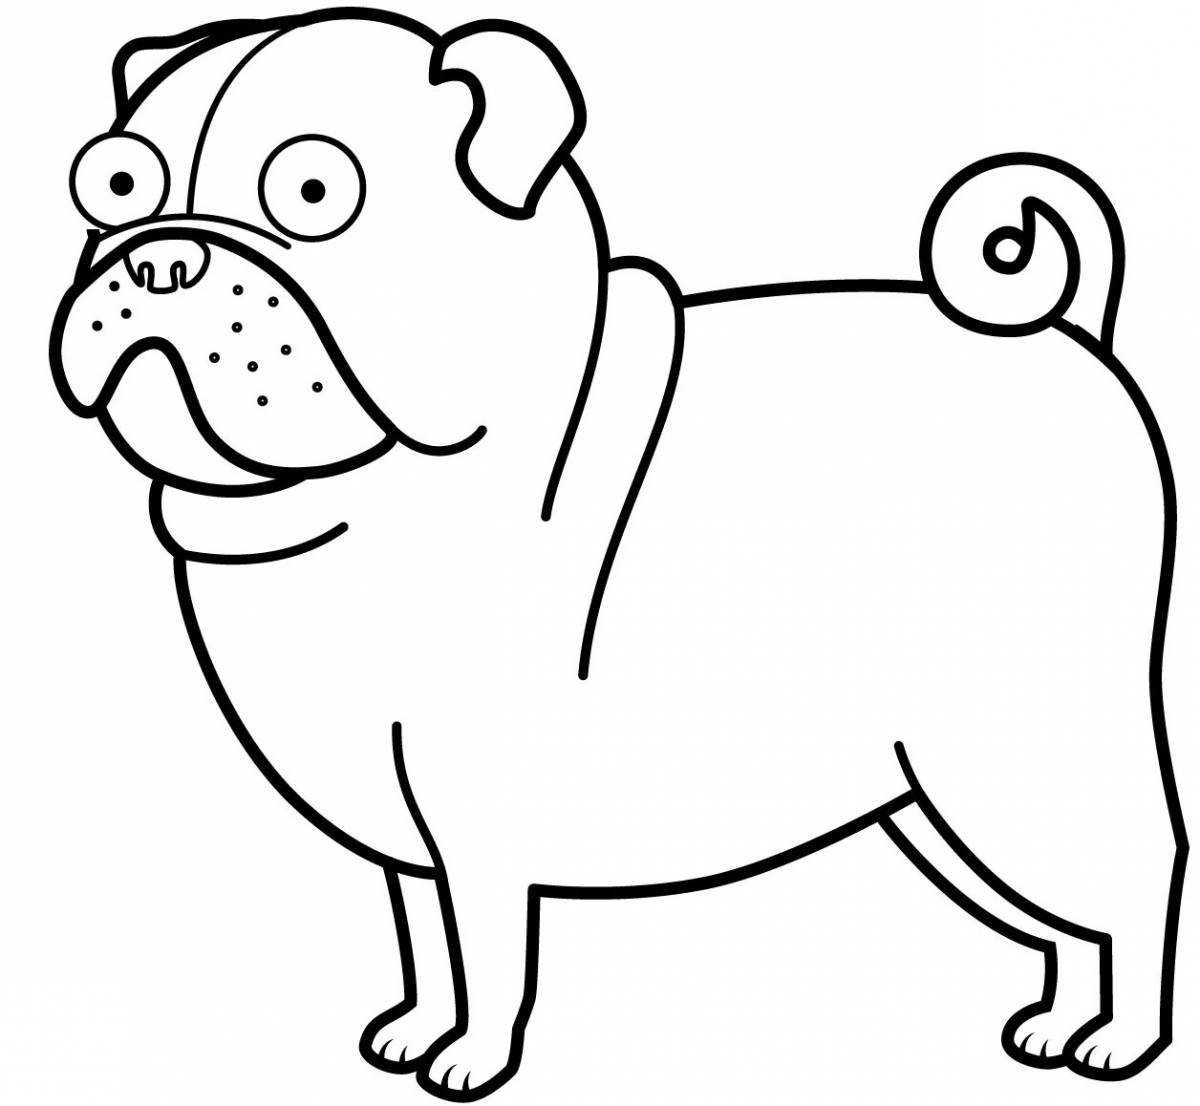 Bright pug coloring page